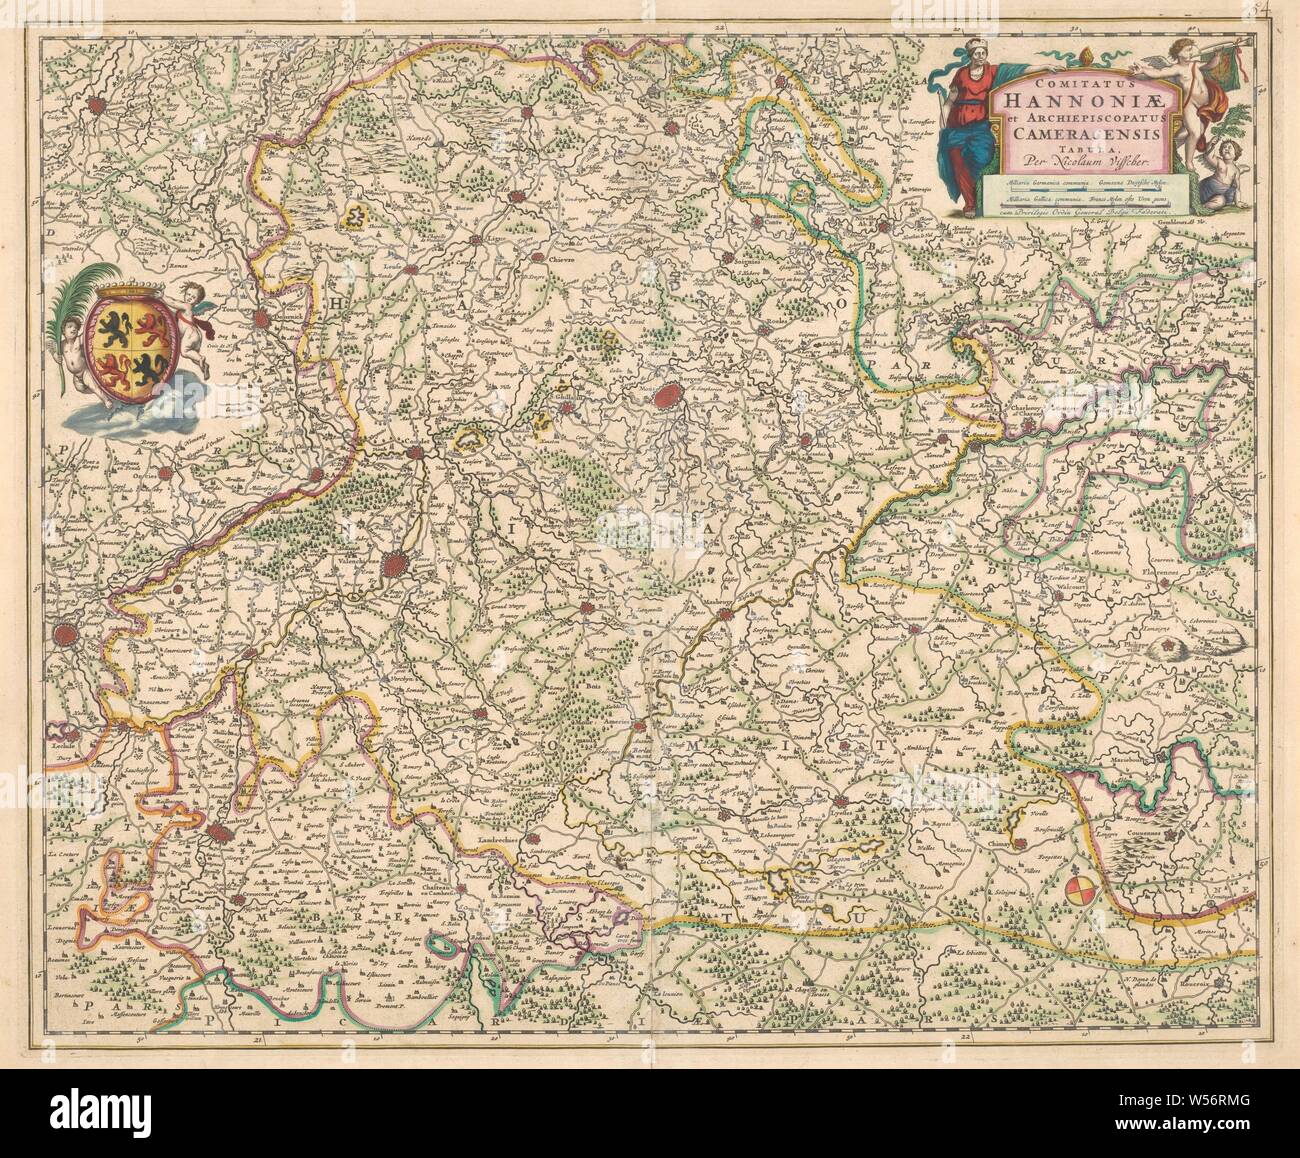 Cartography in 17th century, Hainaut and of the Archdiocese of Kamerijk, Map of Hainaut and Kamerijk, the north shifted slightly to the left. Inscription r.b. flanked by allegorical figures and putti, just below it in scale in German and French miles and Privilegie. L.b. crowned coat of arms flanked by putti. The borders on the map are colored and trees, branches and buildings have been drawn. Inscription, r.b .: COMITATUS / HANNONIAE / ARCHIEPISCOPATUS / CAMERACENSIS / TABULA. Signed, r.b .: Per Nicolaum Visscher, Hainaut, Cambrai, Nicolaes Visscher (I), Amsterdam, 1650 - 1700, paper Stock Photo